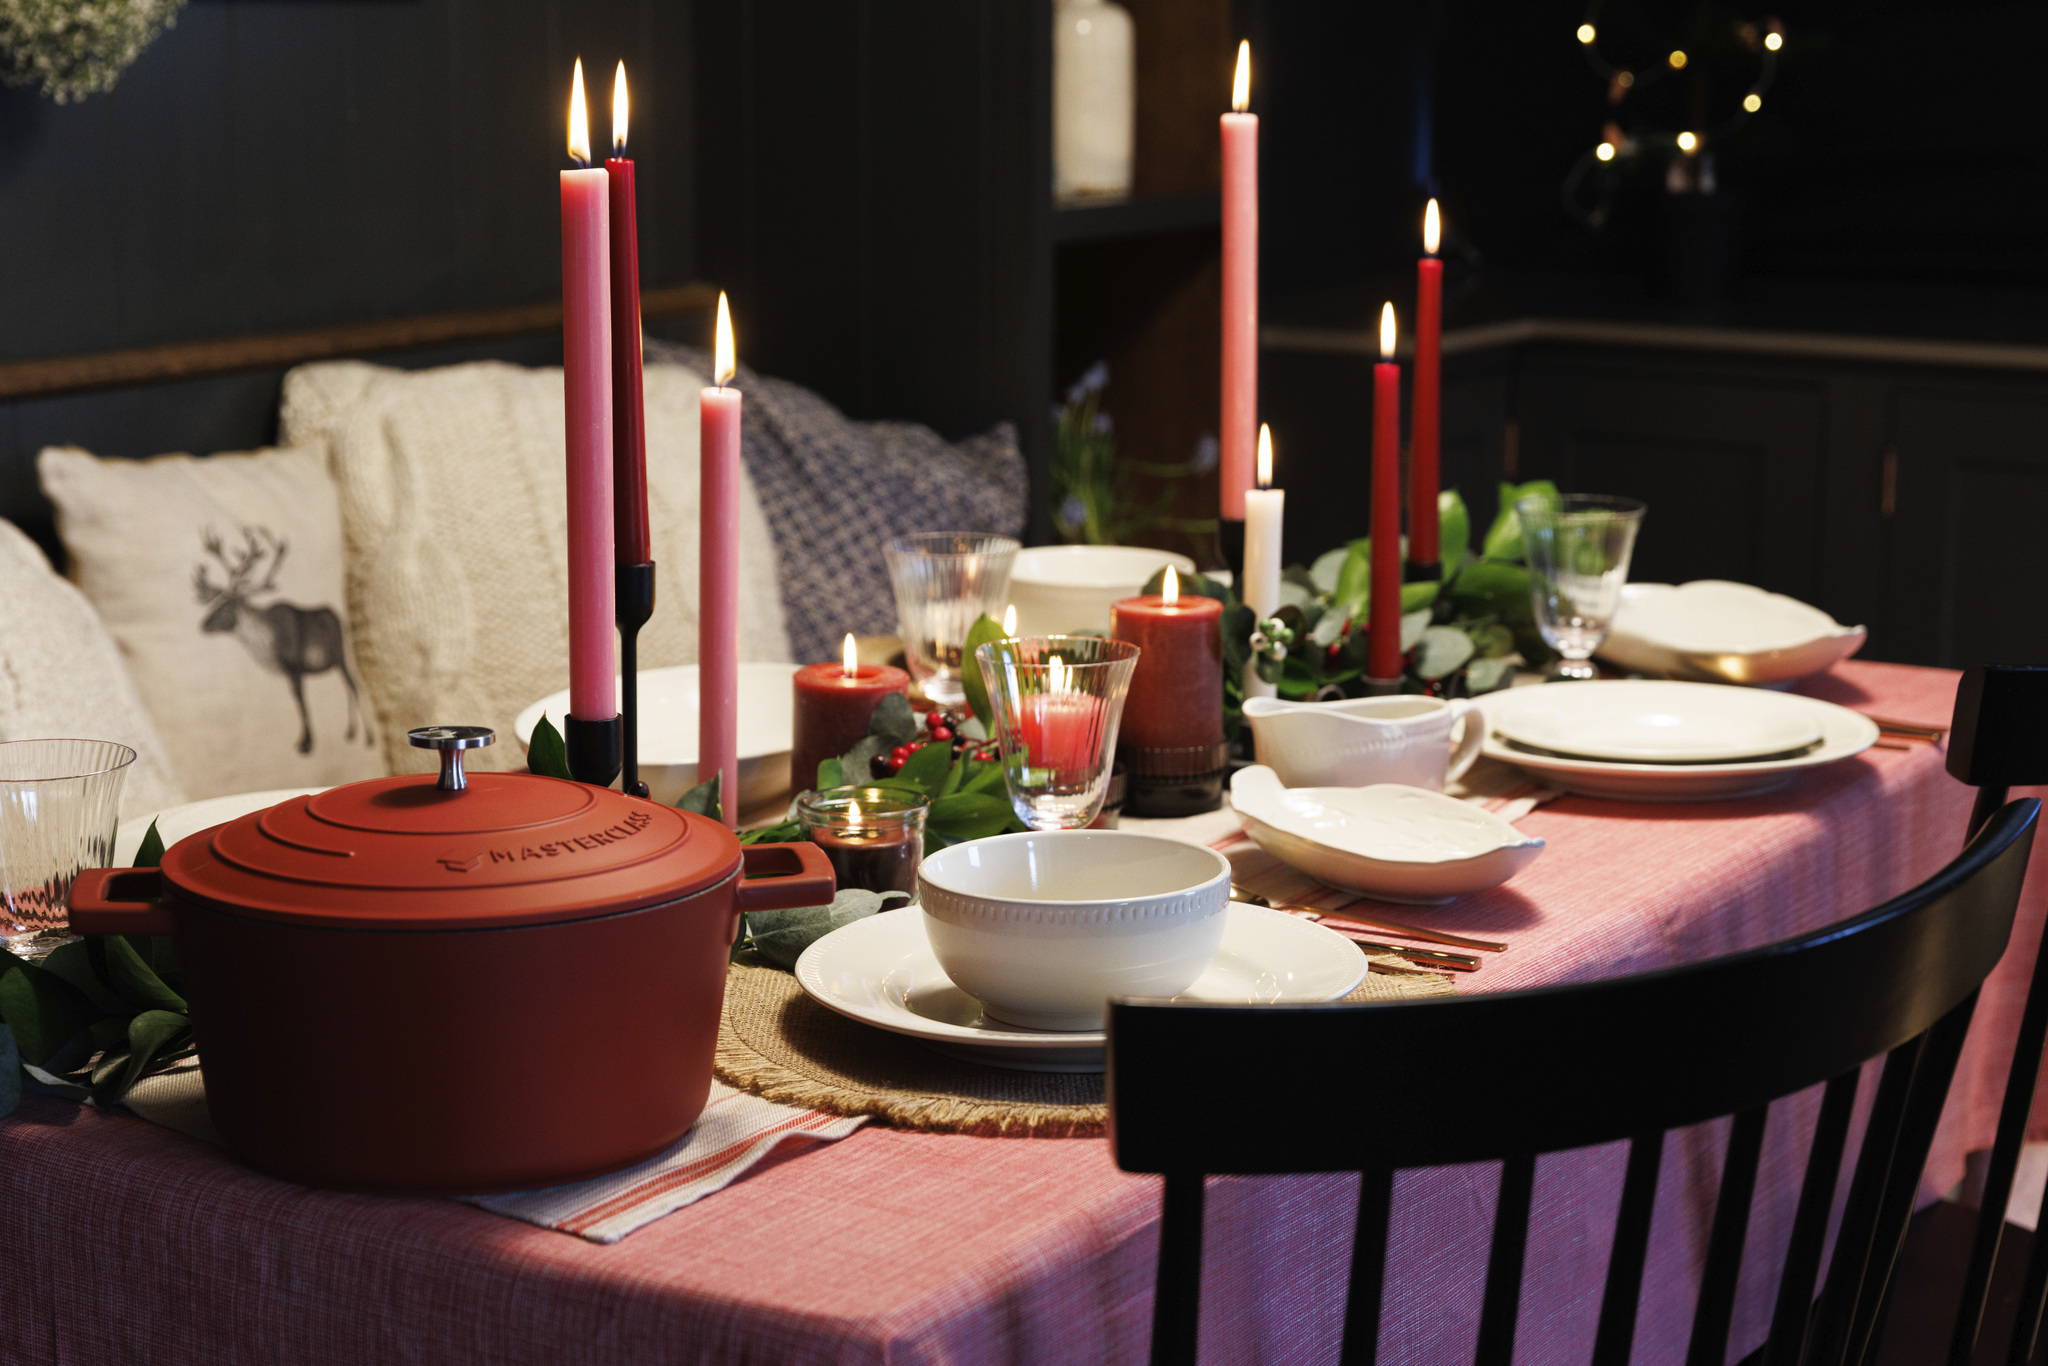 A set dining table decorated with candles and holly.